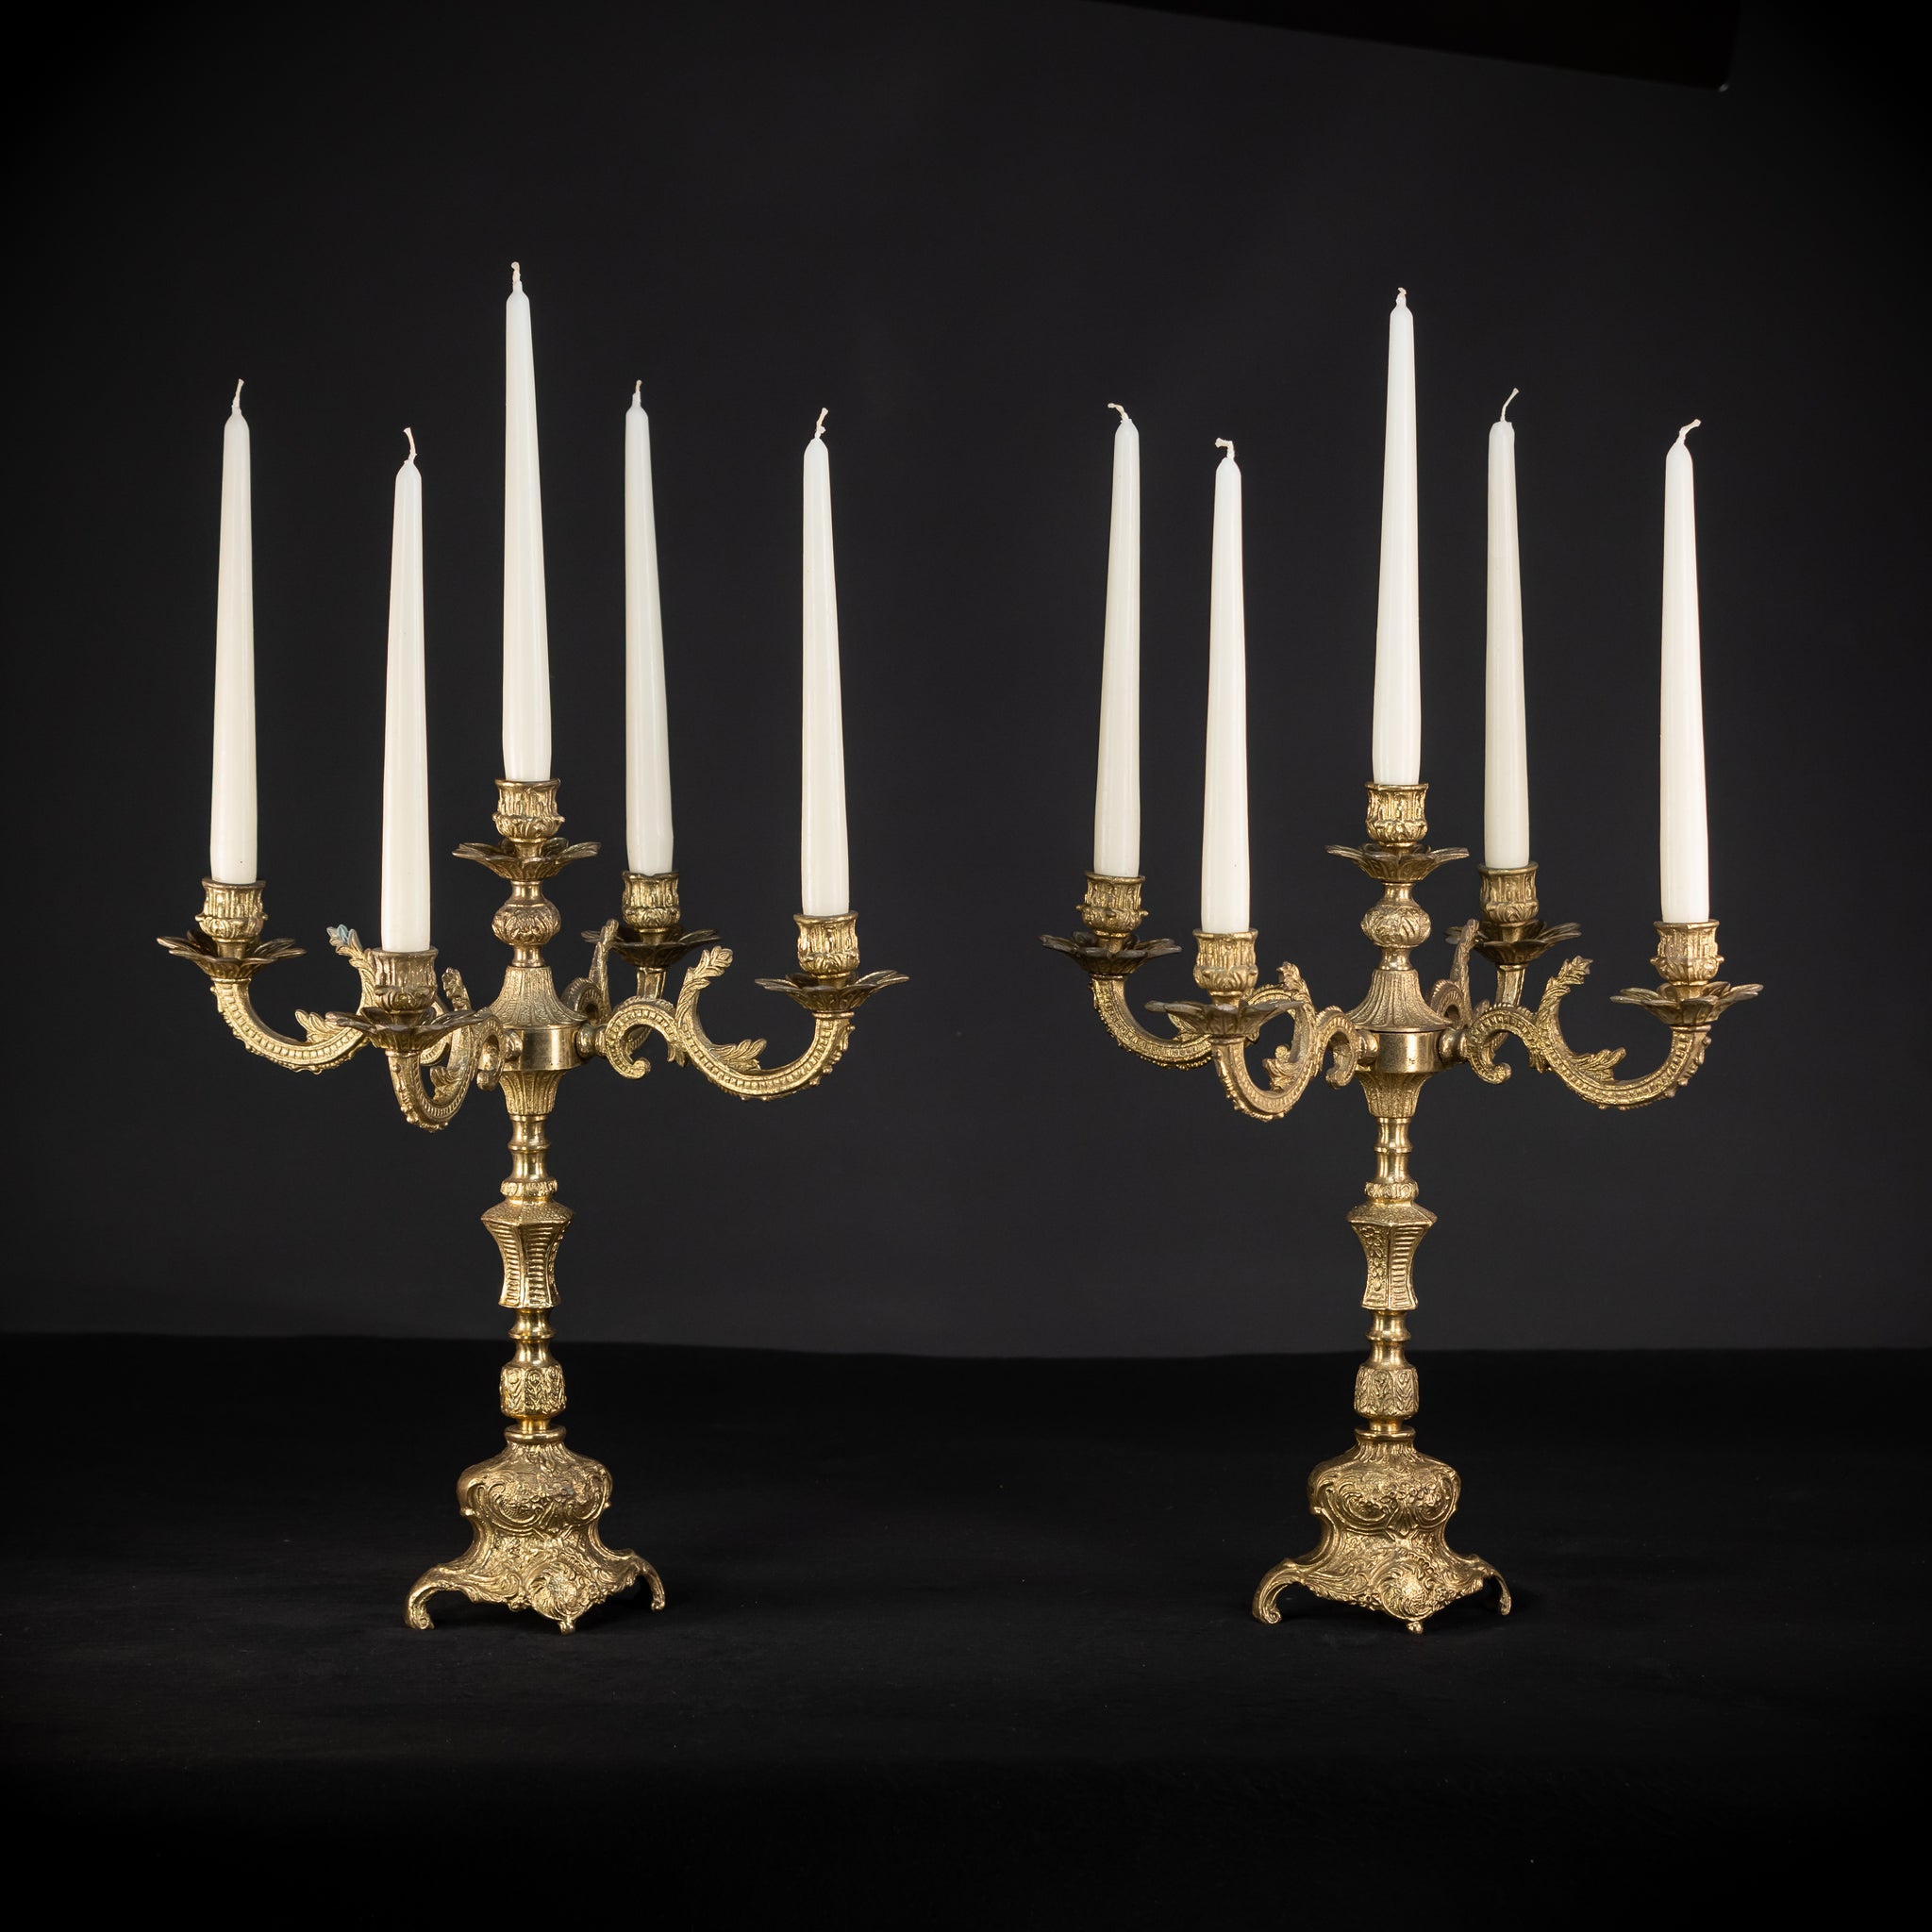 Pair of French Bronze Candelabras | Mid 1900s Vintage | 16.5"/ 42 cm